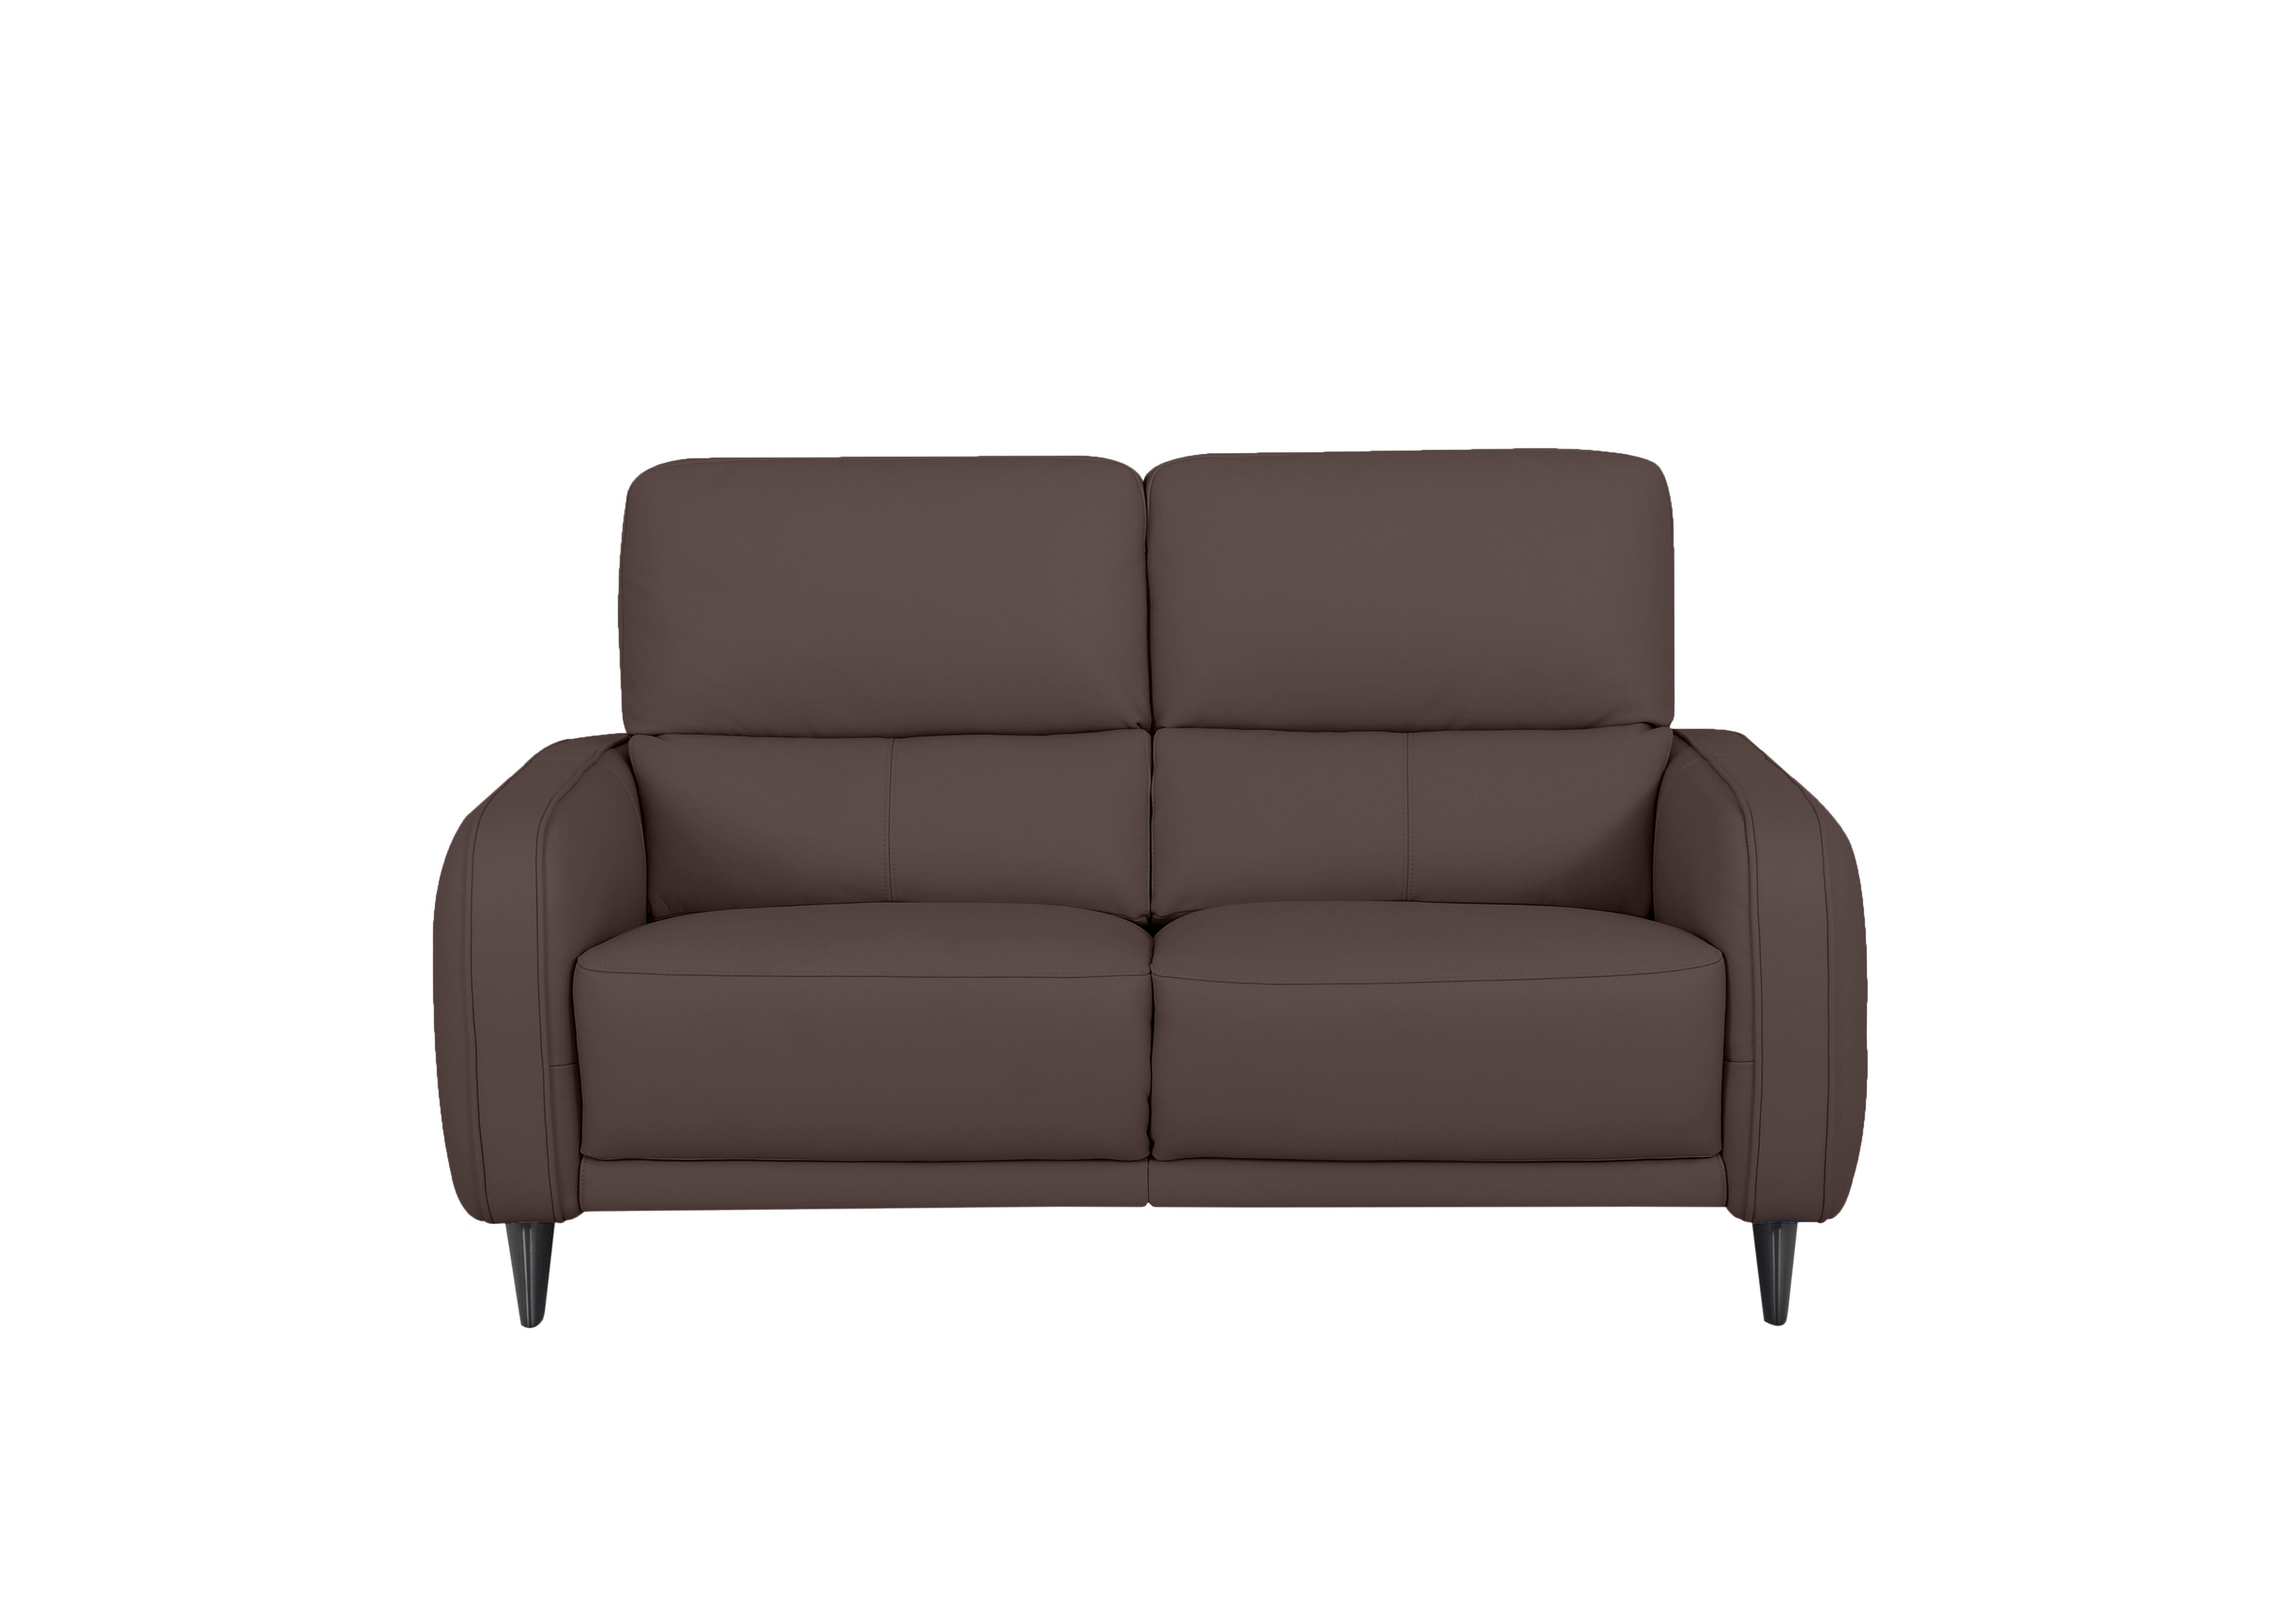 Logan 2.5 Seater Leather Sofa in Nn-512e Cacao Brown on Furniture Village